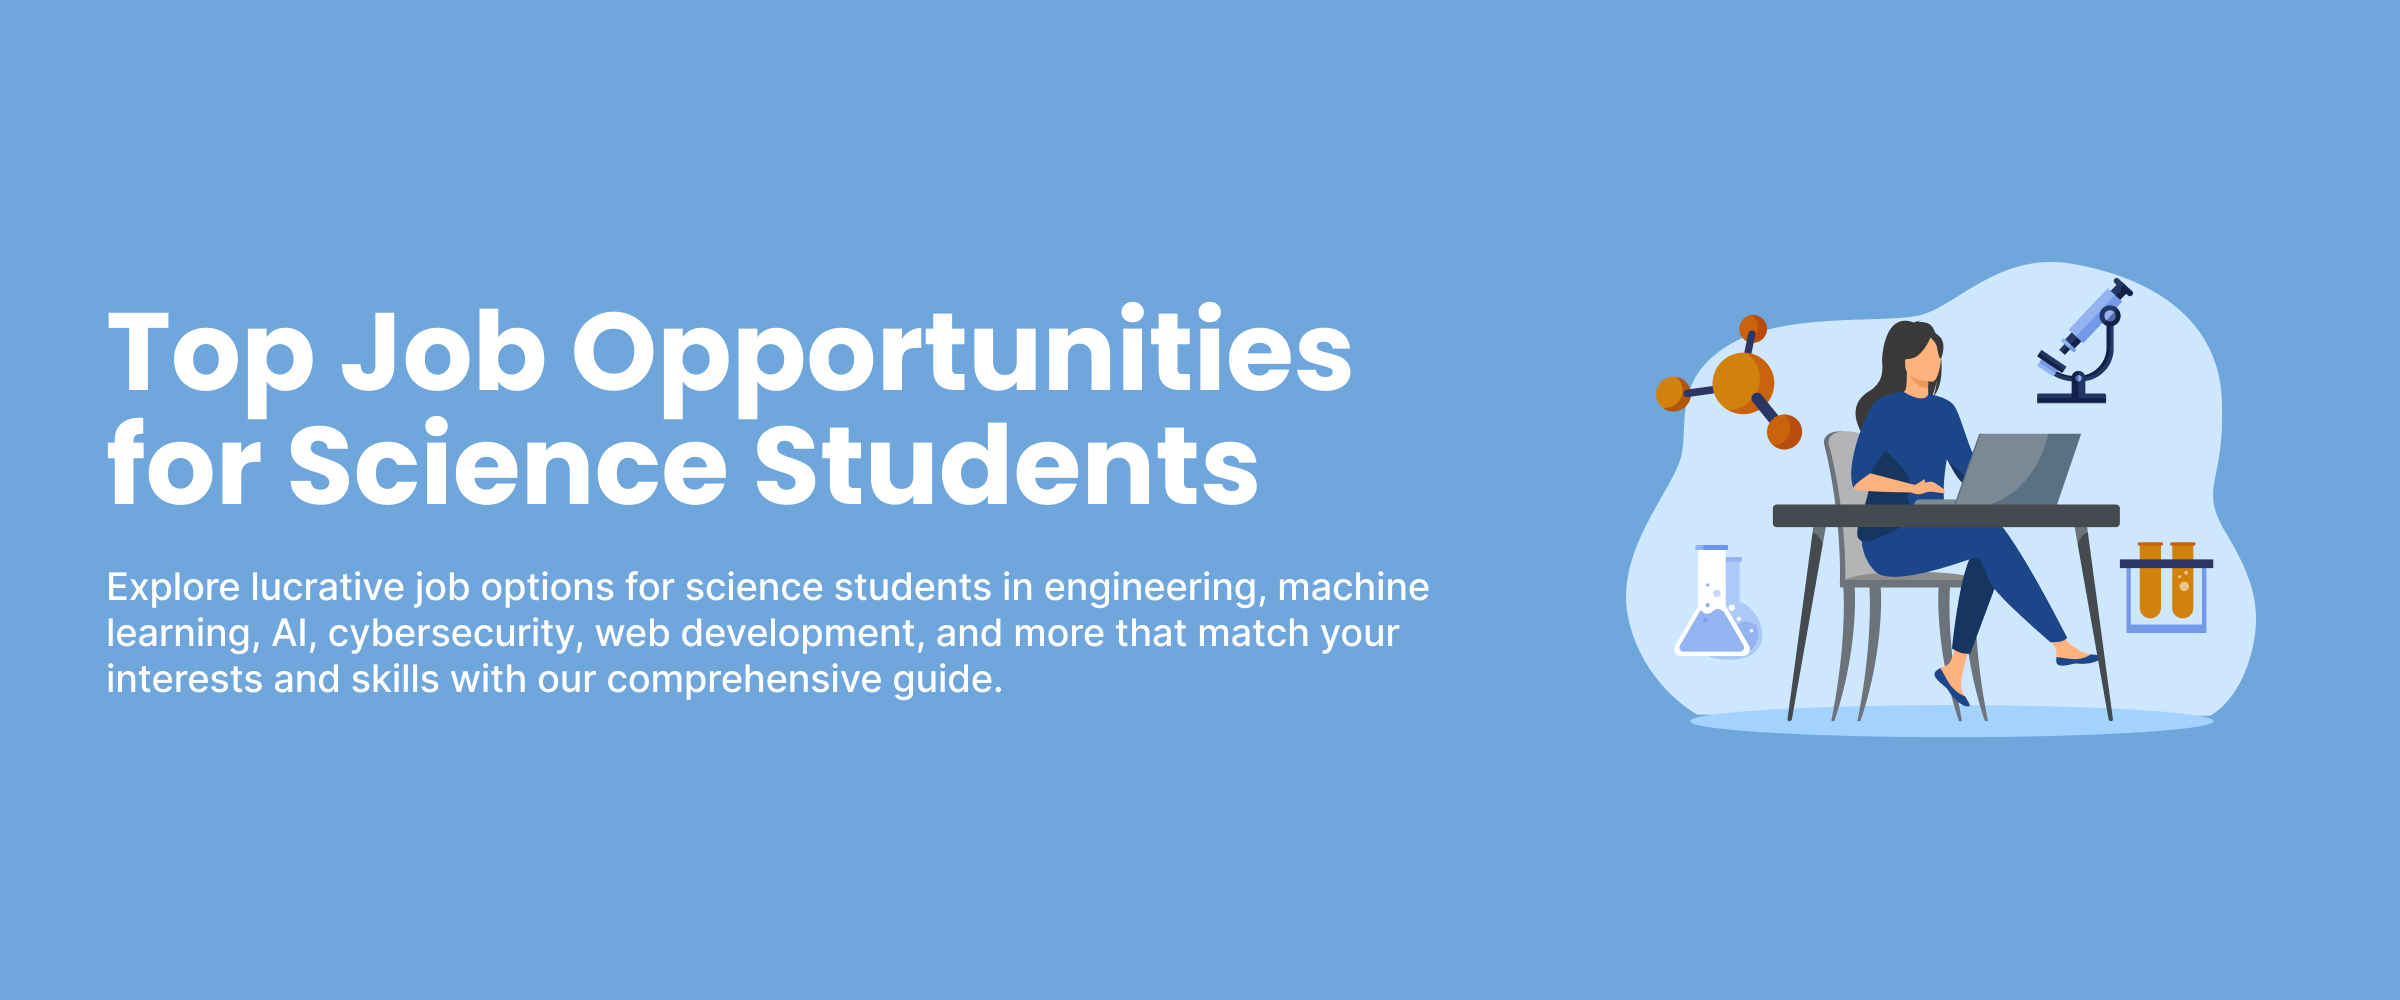 Top Job Opportunities for Science Students